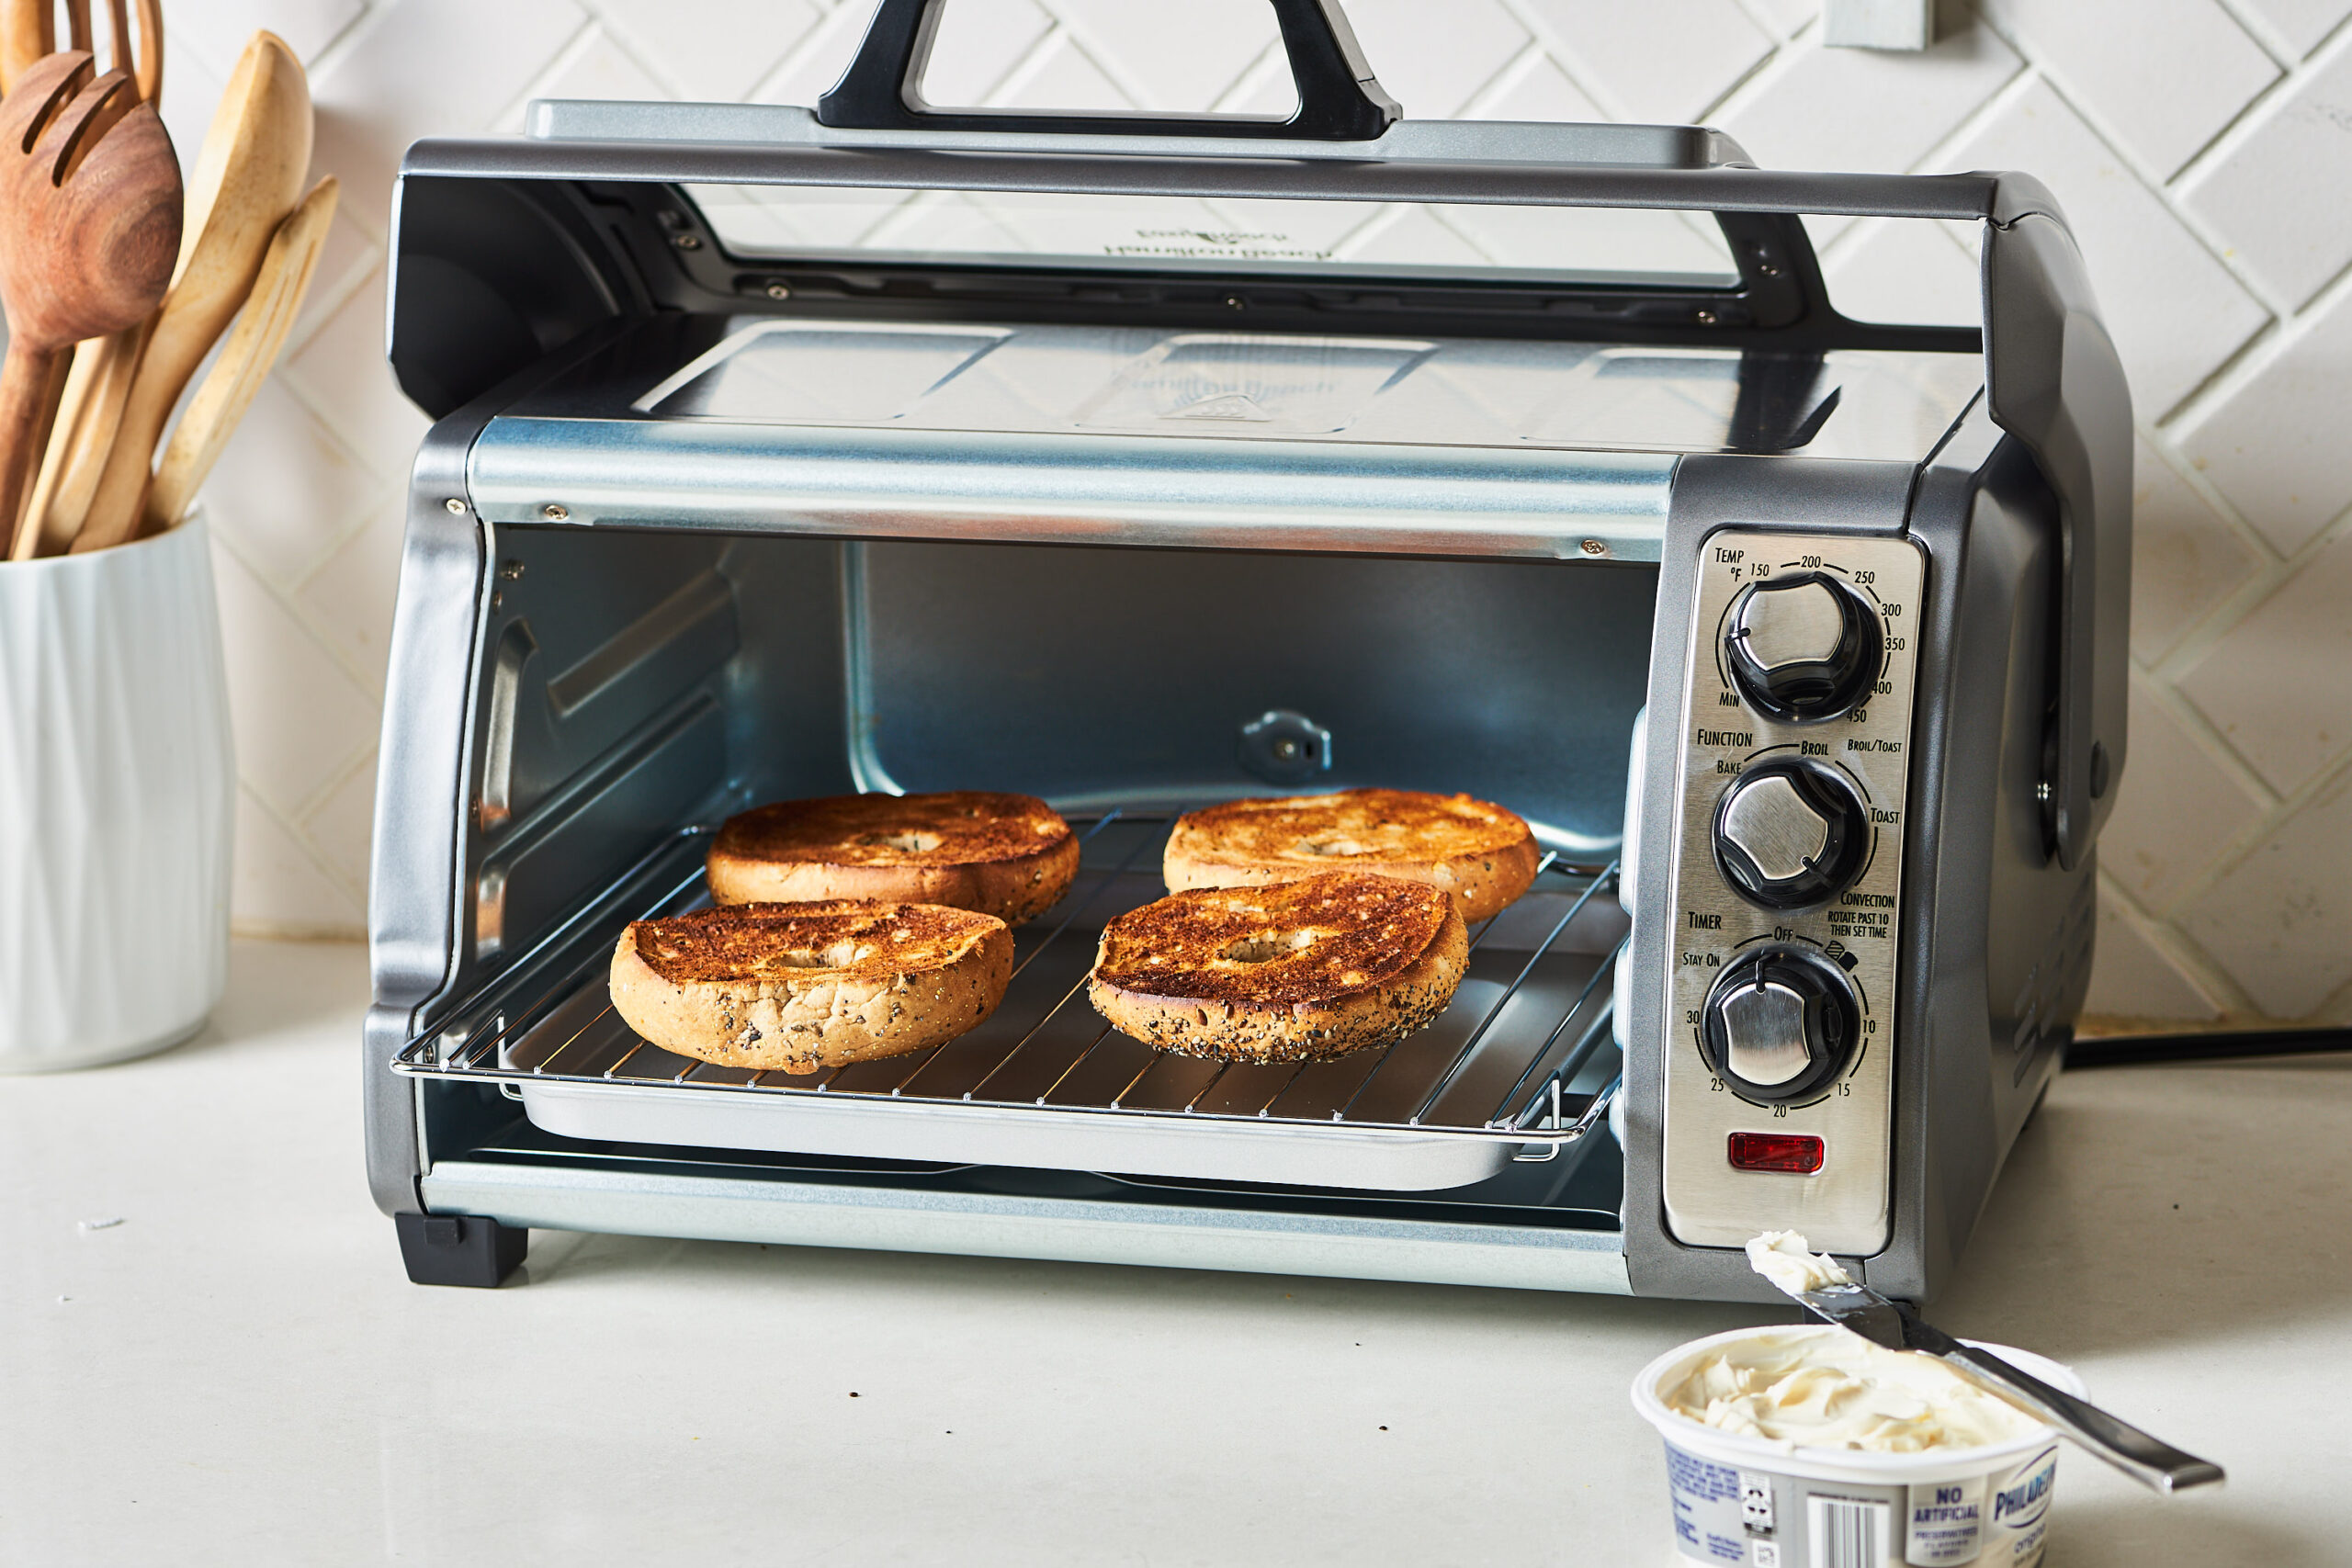 Best Toaster Oven under 50 Review and Buyer's Guide [Feb 2022]